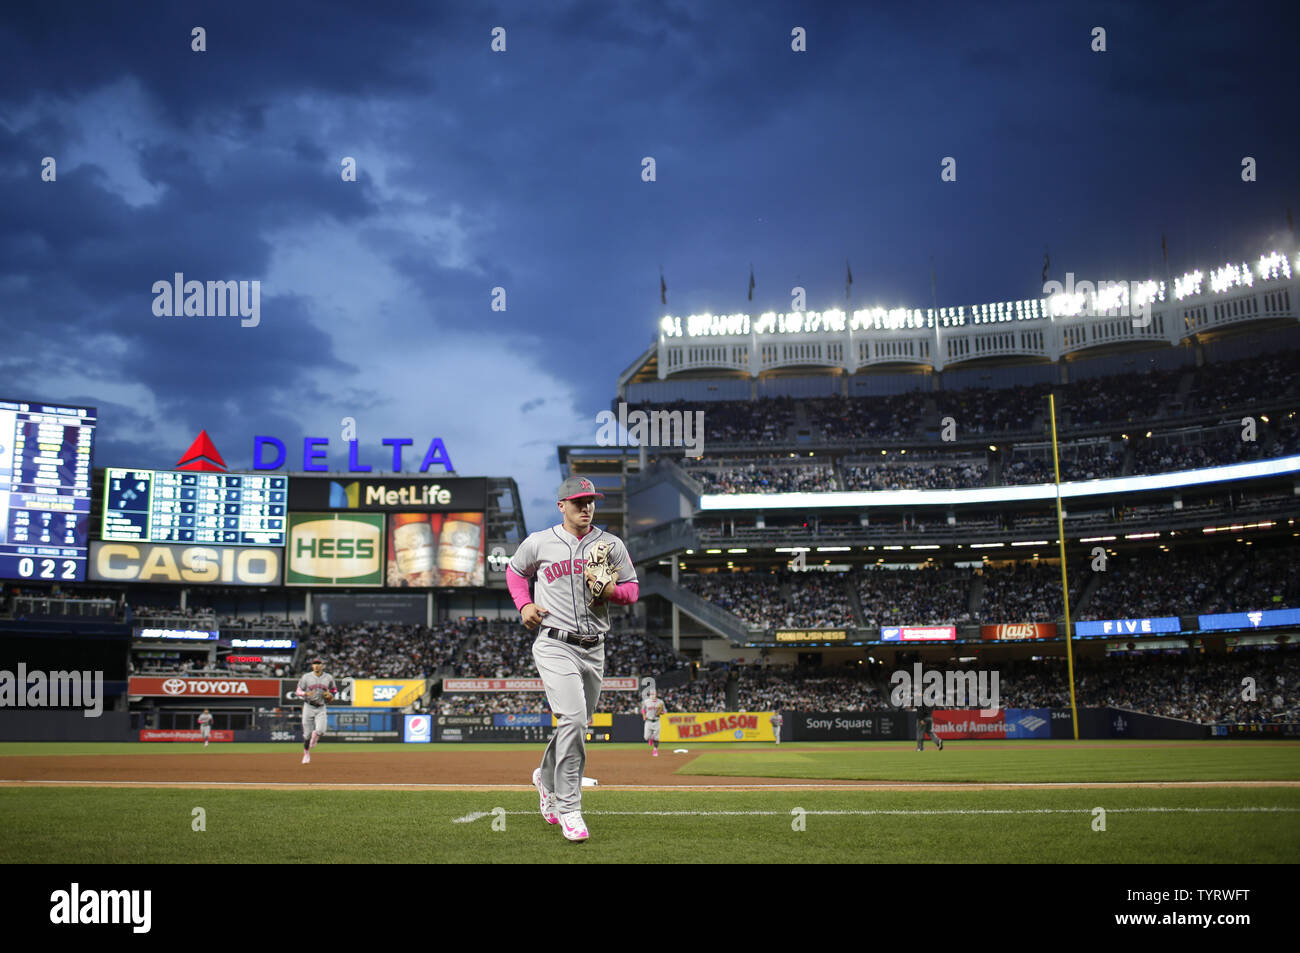 Houston Astros Alex Bregman jogs off of the field in the first inning against the New York Yankees at Yankee Stadium in New York City on May 14, 2017. The New York Yankees former shortstop Derek Jeter before the game had his No. 2 retired and was also honored with a plaque in Monument Park.     Photo by John Angelillo/UPI Stock Photo